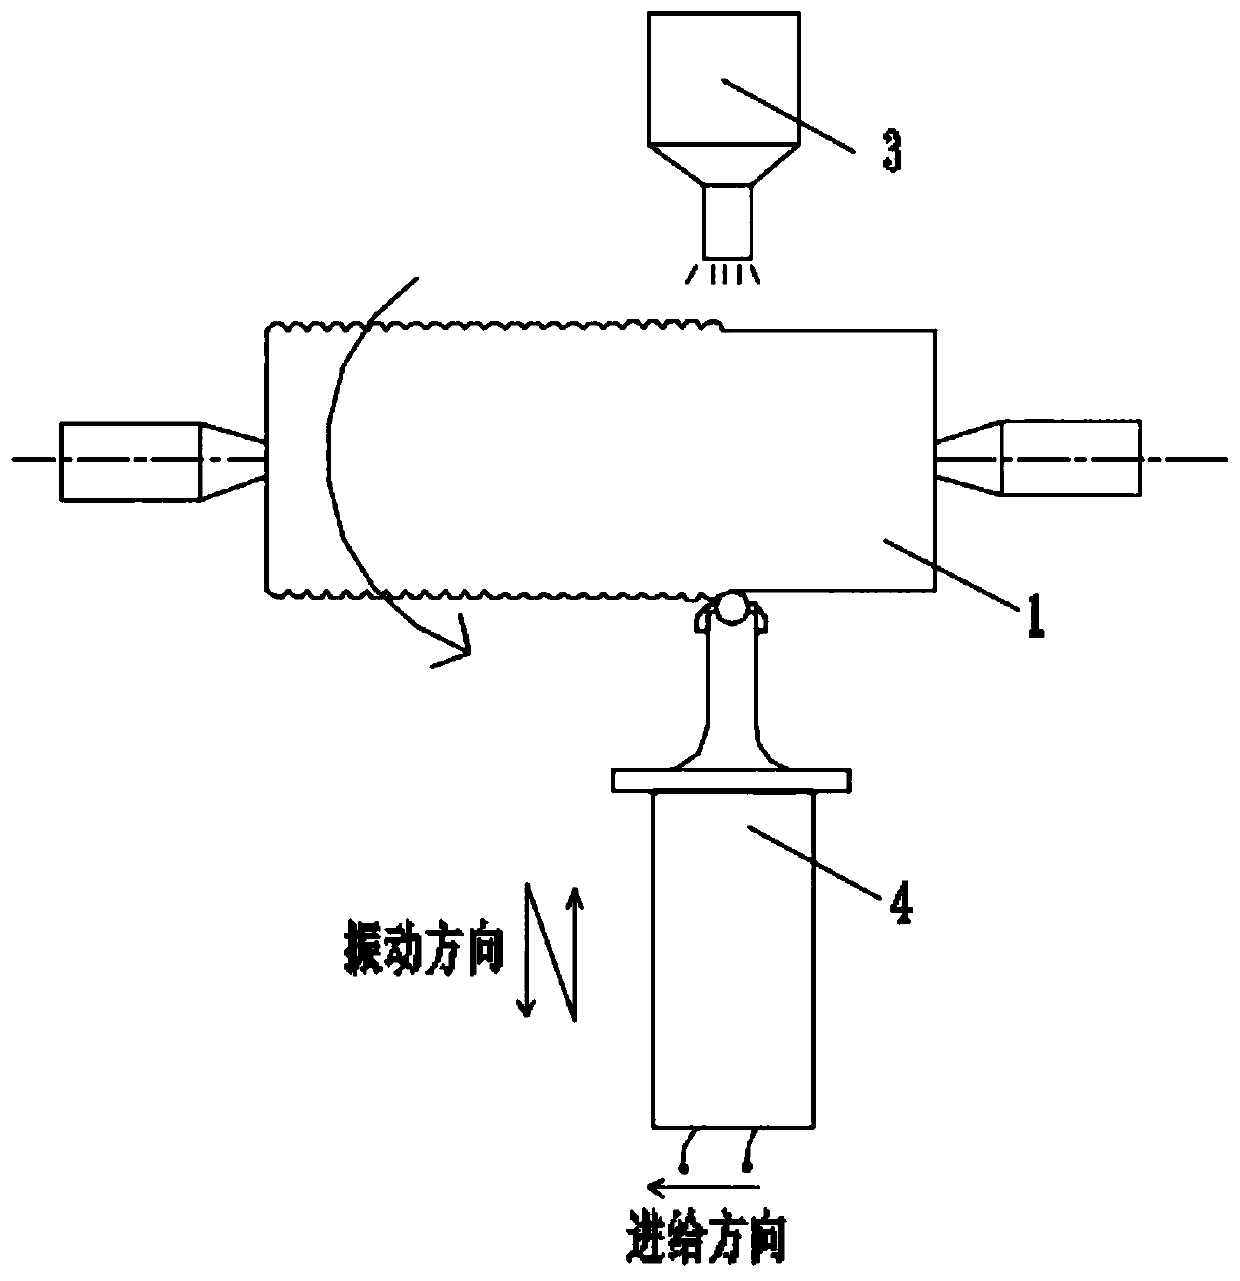 High-performance surface composite strengthening method for shaft parts